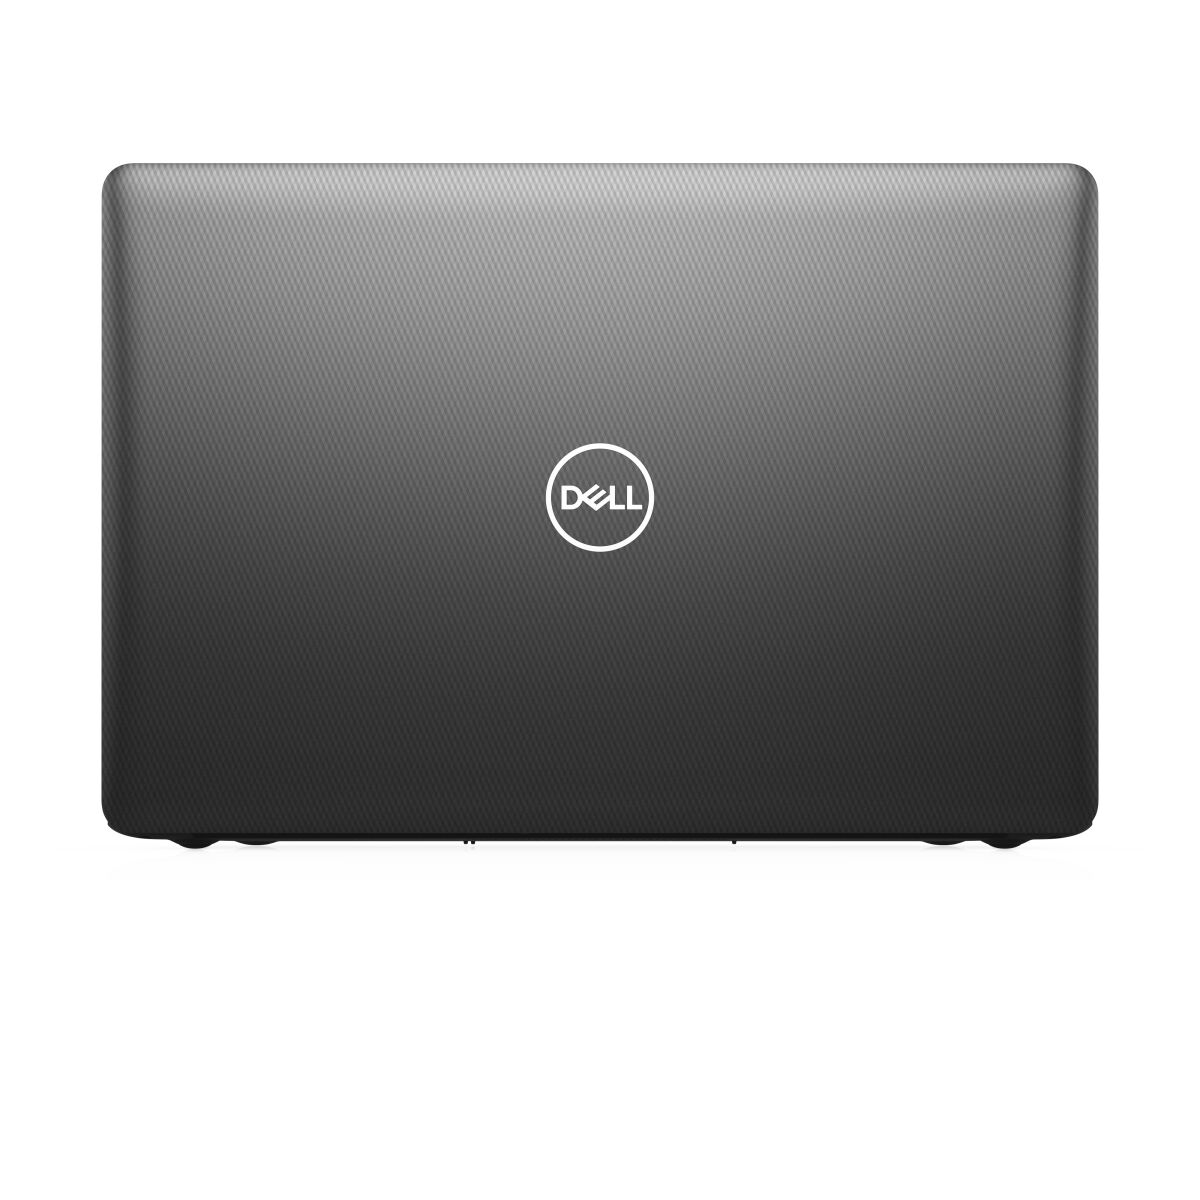 Dell Inspiron 3780 Bn37808 Laptop Specifications 5644